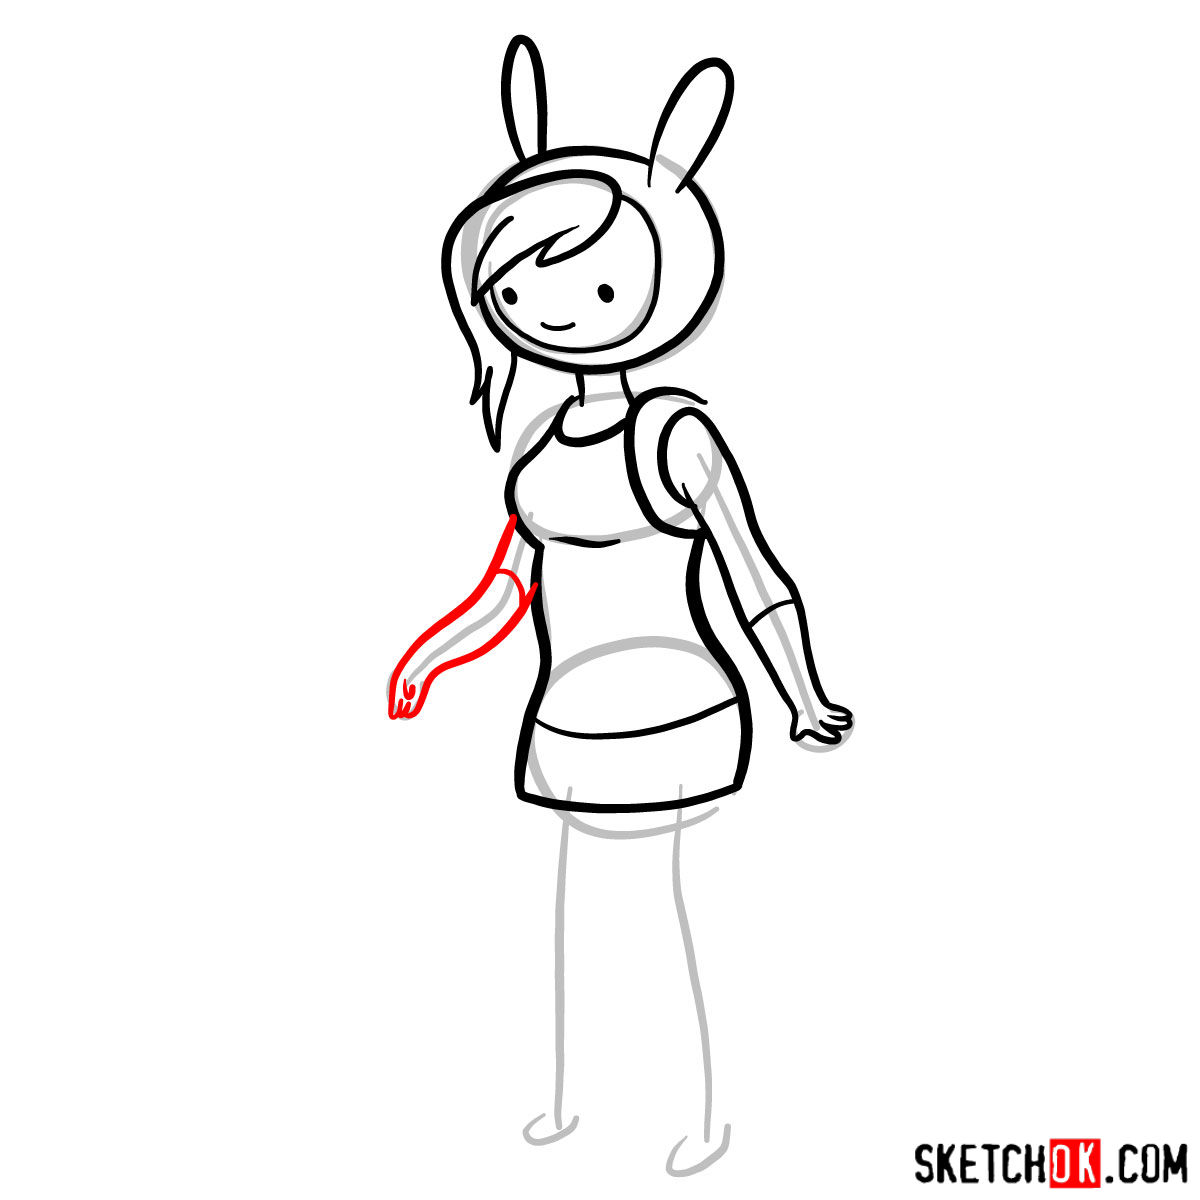 How to draw Fionna from Adventure Time - step 08